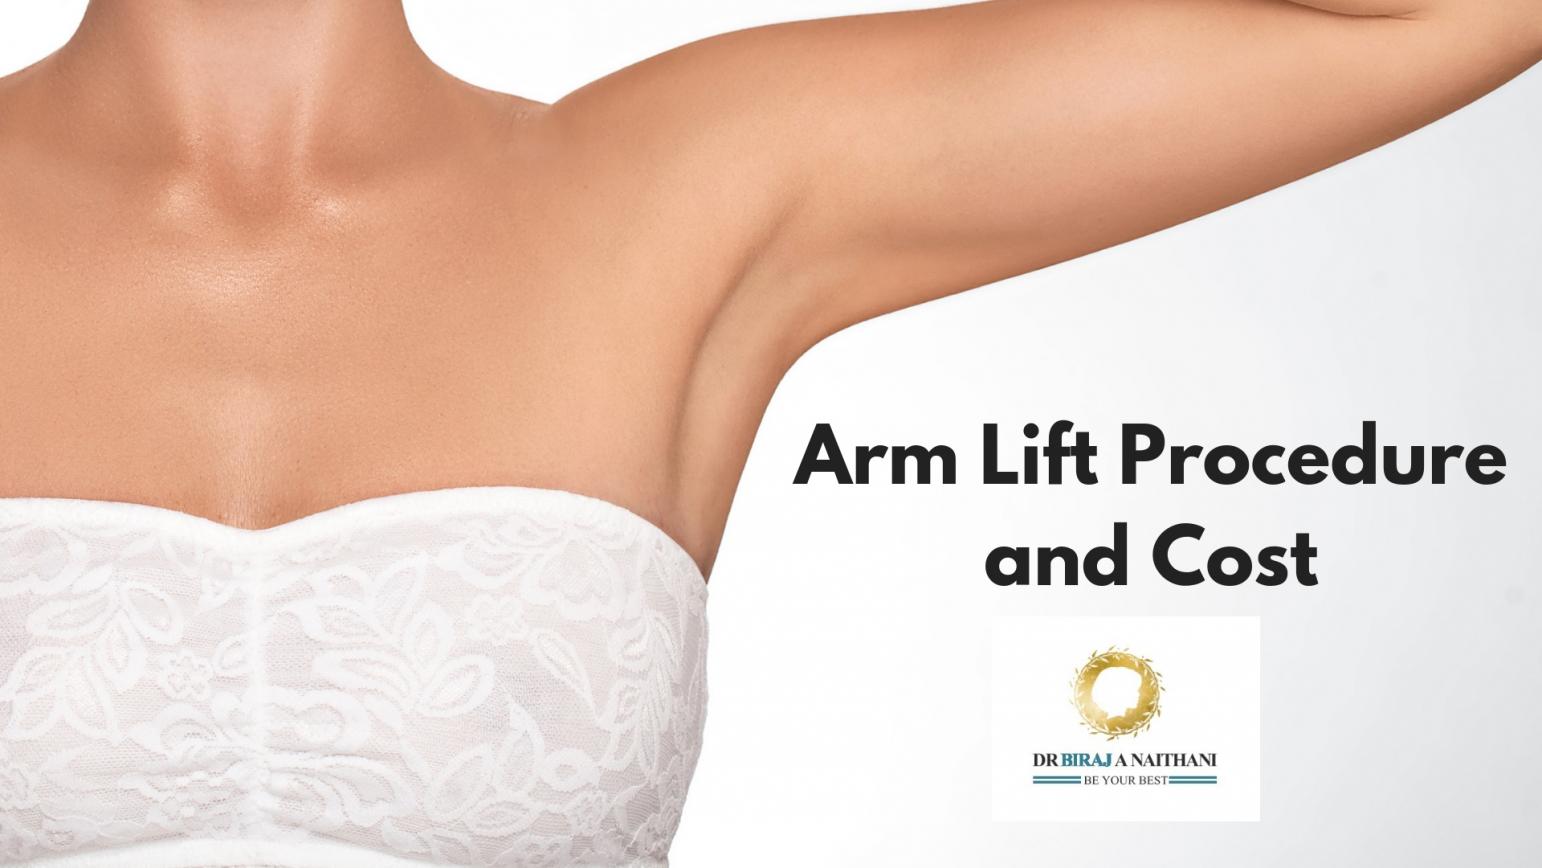 Looking for Arm lift surgery removes saggy skin and red rapes the remaining skin, giving it a tighter and smoother appearance. Well, you are on the right place at Dr. Biraj A Naithani. We are providing the best arm lift at lowest cost. Do get in touch with us at +971 2 6335556 http://plasticasurgery.org/procedure/arm-lift/